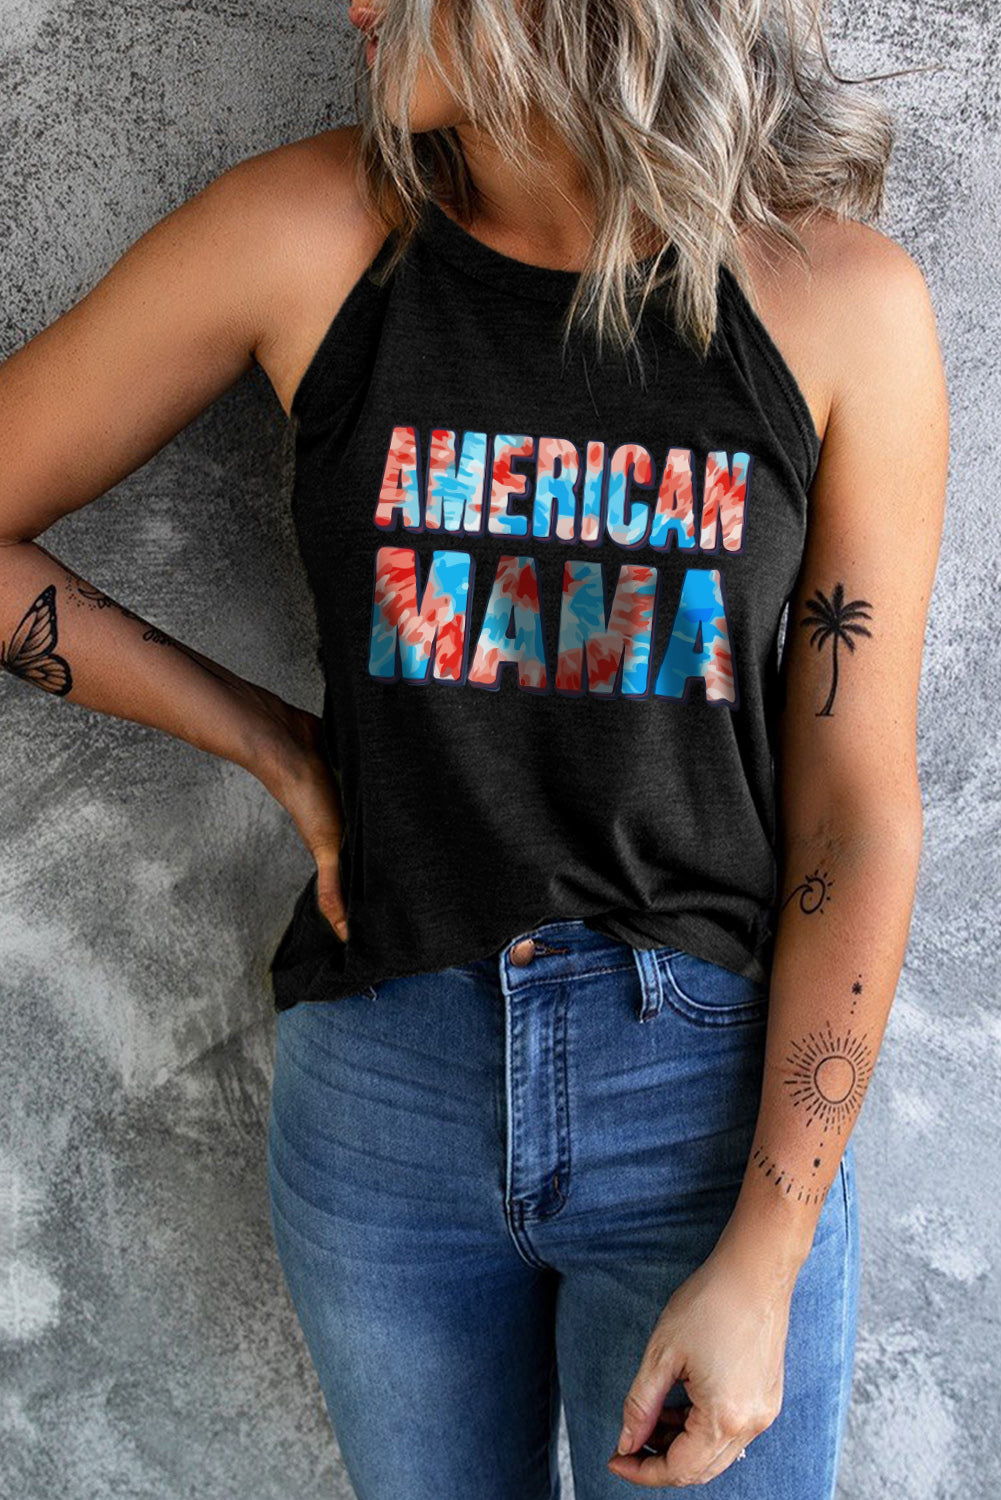 Tie-dye AMERICAN MAMA Shirt Patriotic Graphic Tank Top (Plus Size Available)